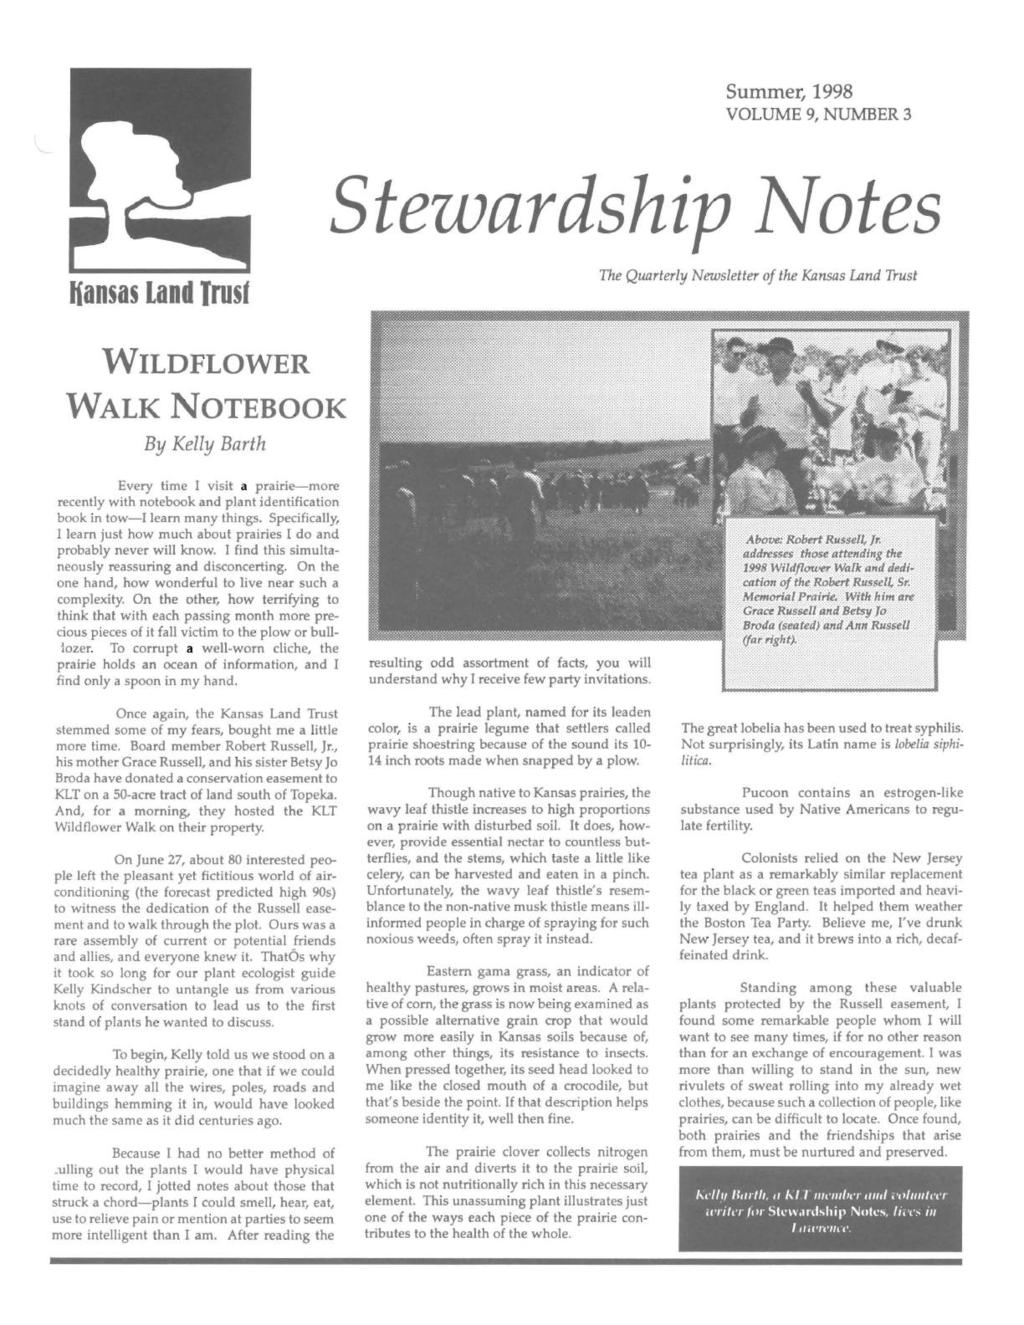 Summer, 1998 VOLUME 9, NUMBER 3 Stezvardship }Votes Kansas land Trusf The Quarterly Newsletter of the Kansas Land Trust WILDFLOWER WALK NOTEBOOK By Kelly Barth Every time I visit a prairie-more